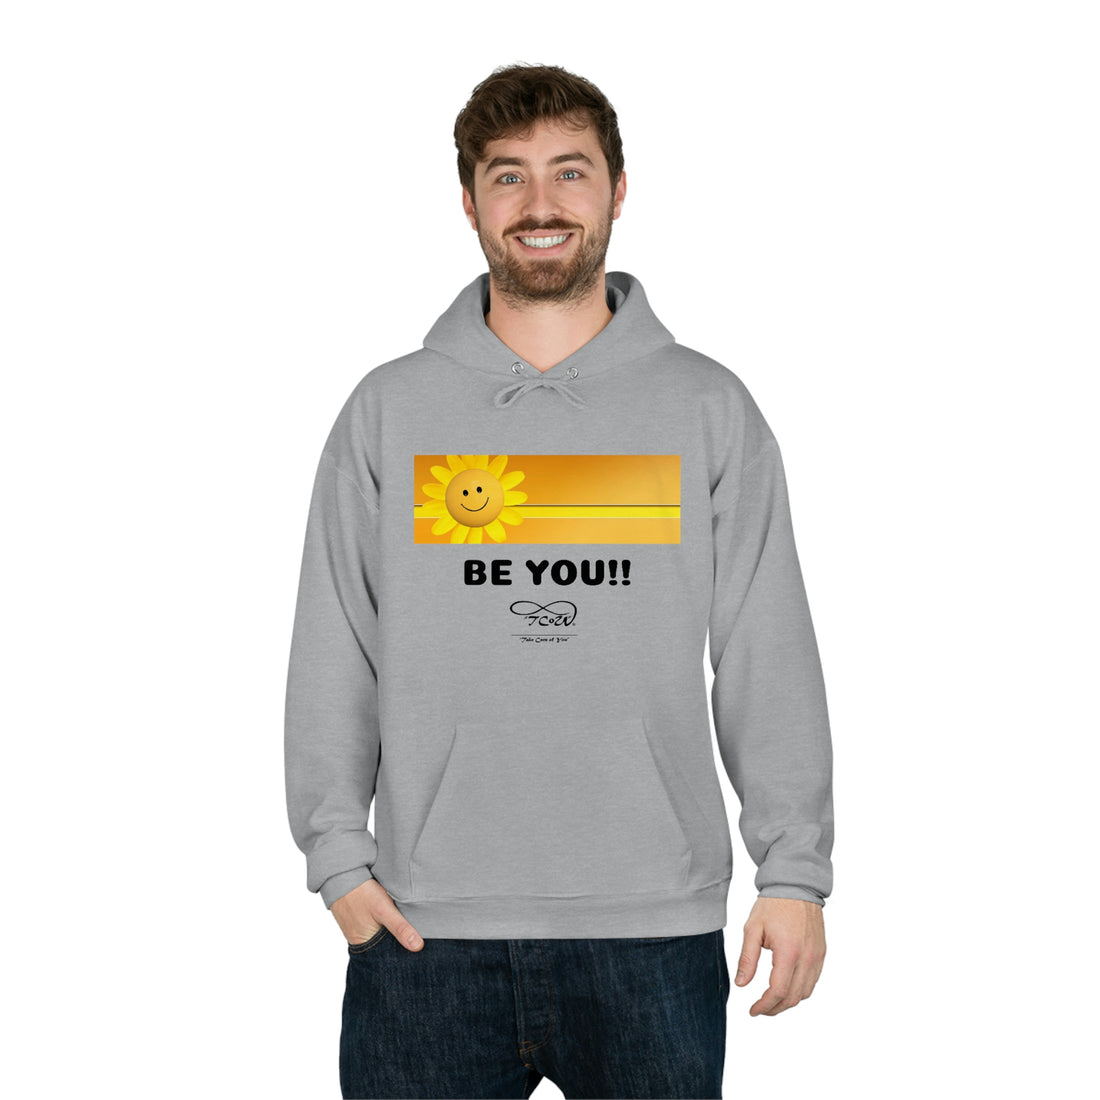 Be You and Find Your Happy!! Pullover Hoodie Sweatshirt